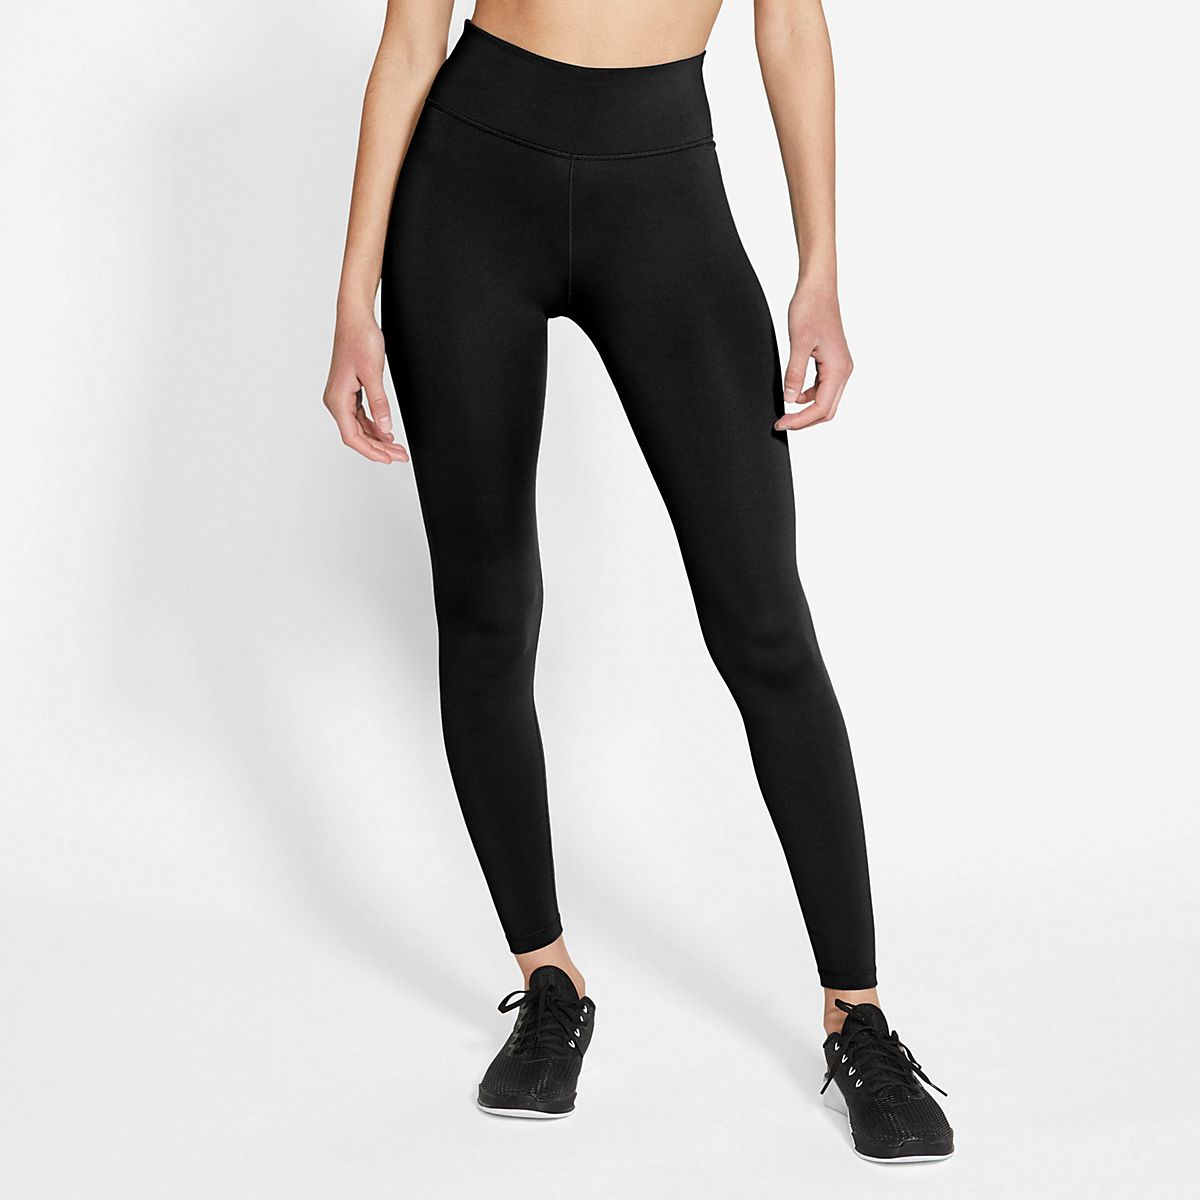 nike performance tights one